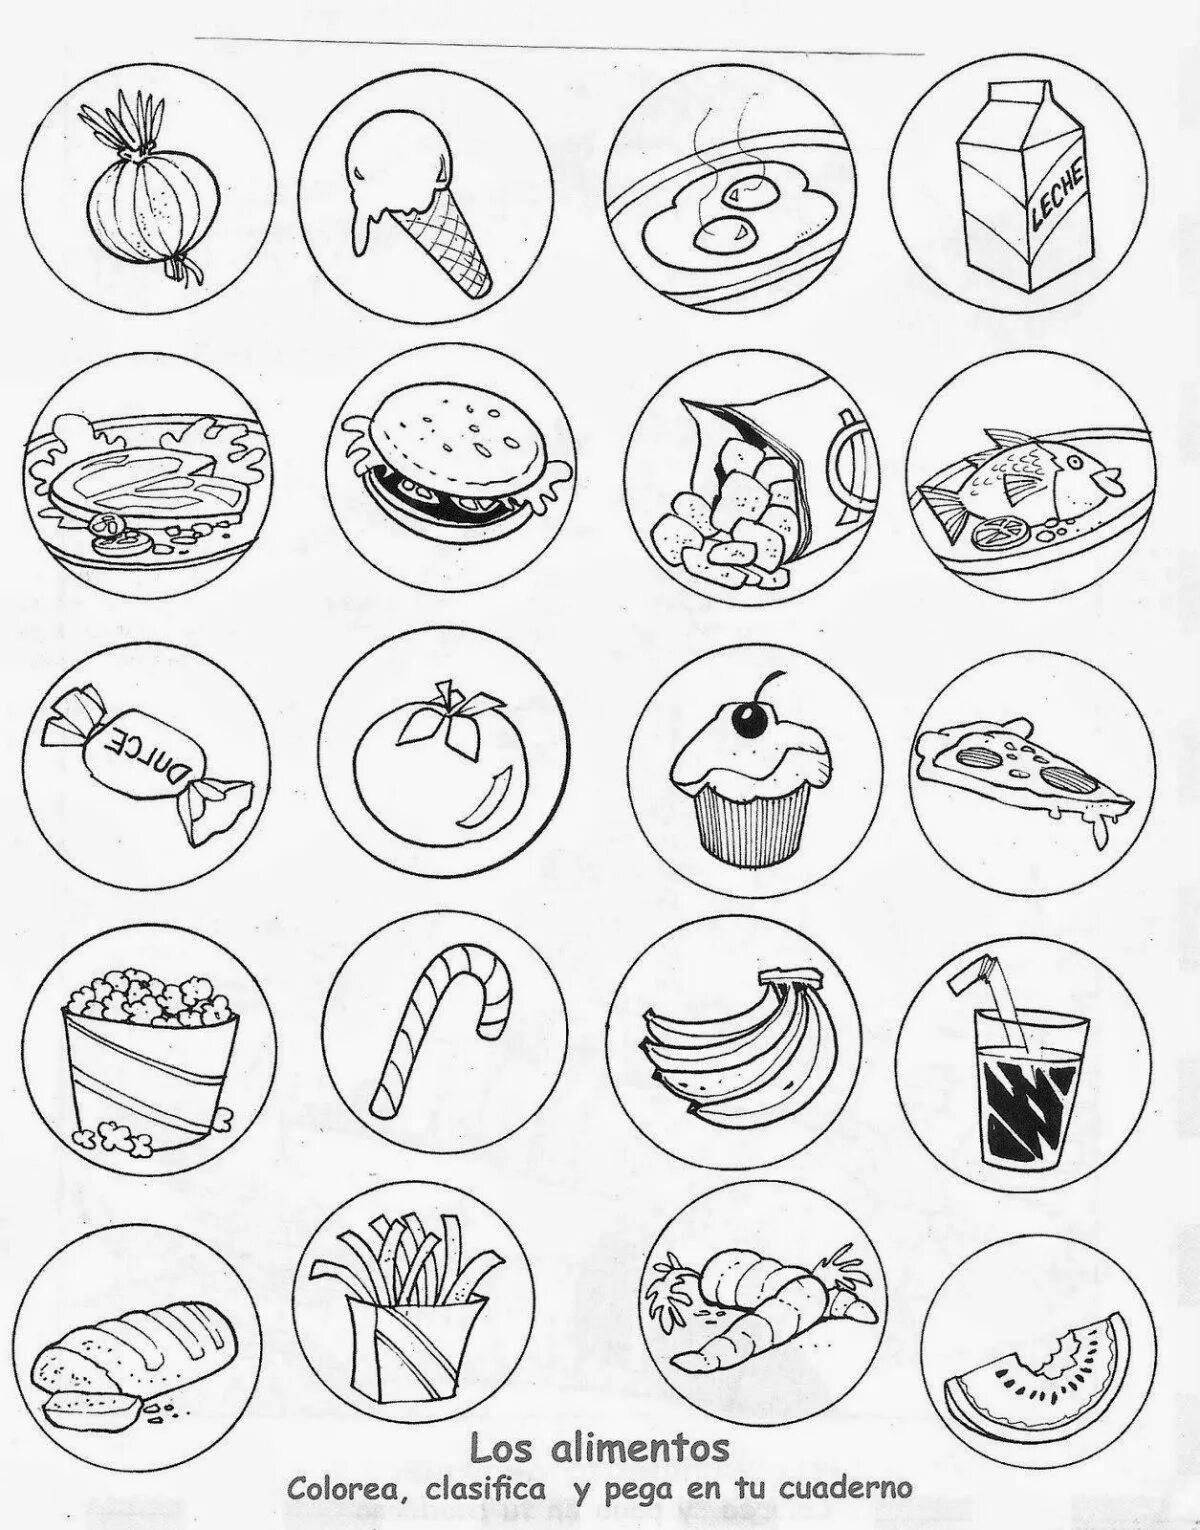 Colored coloring page 